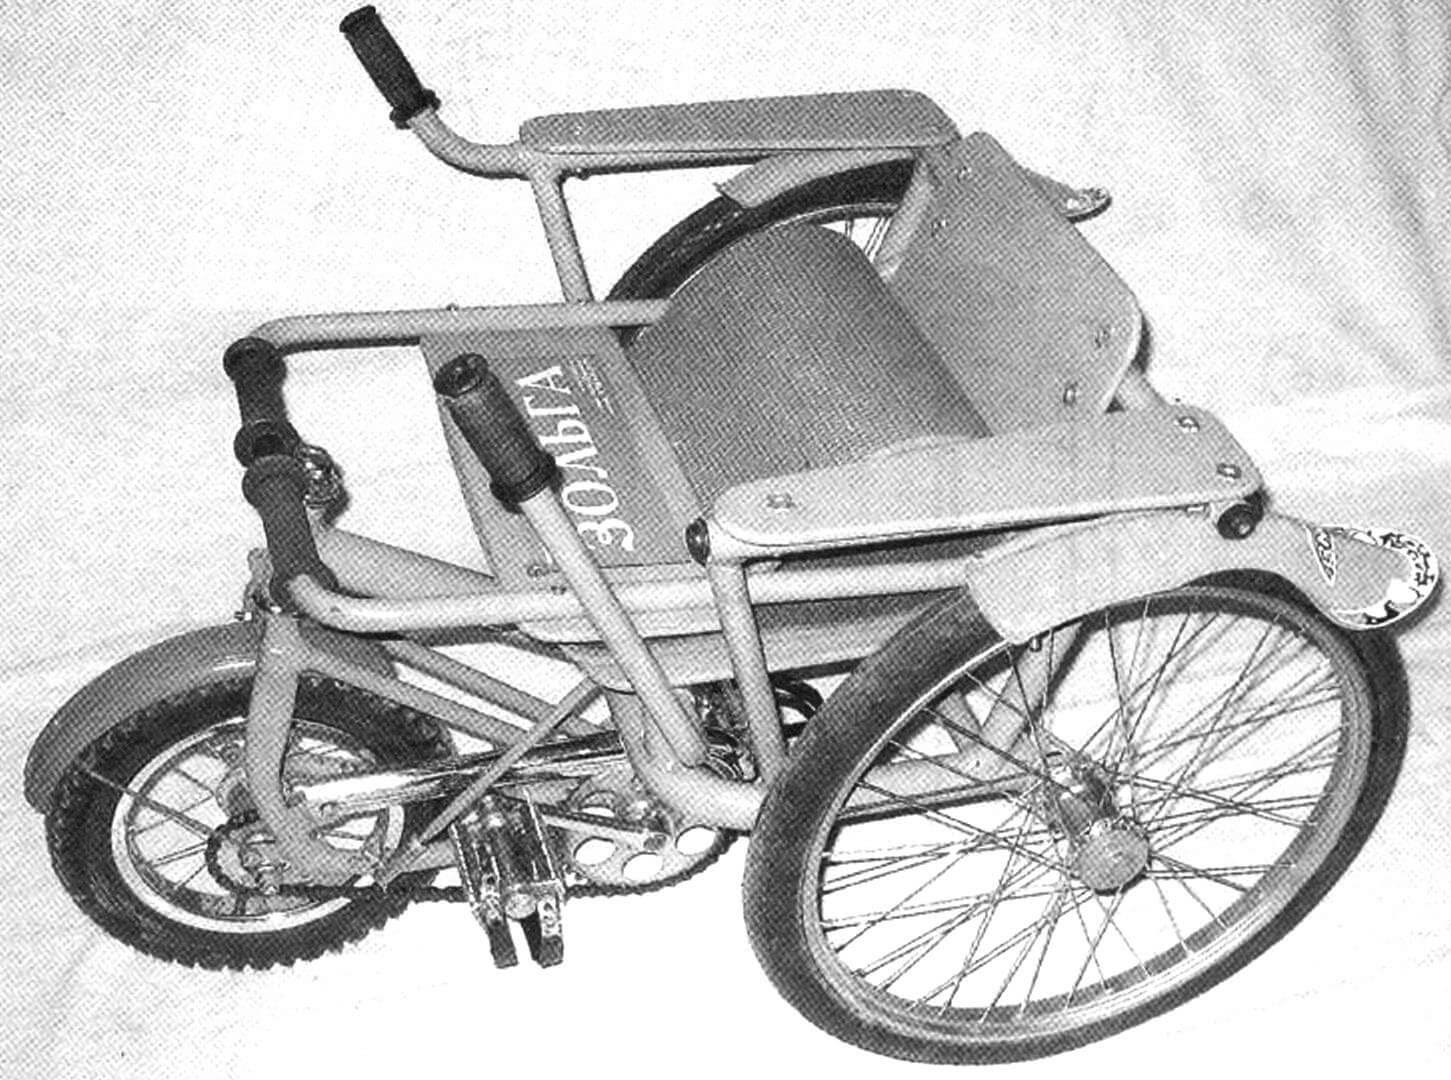 Cycle Stroller in Folded State